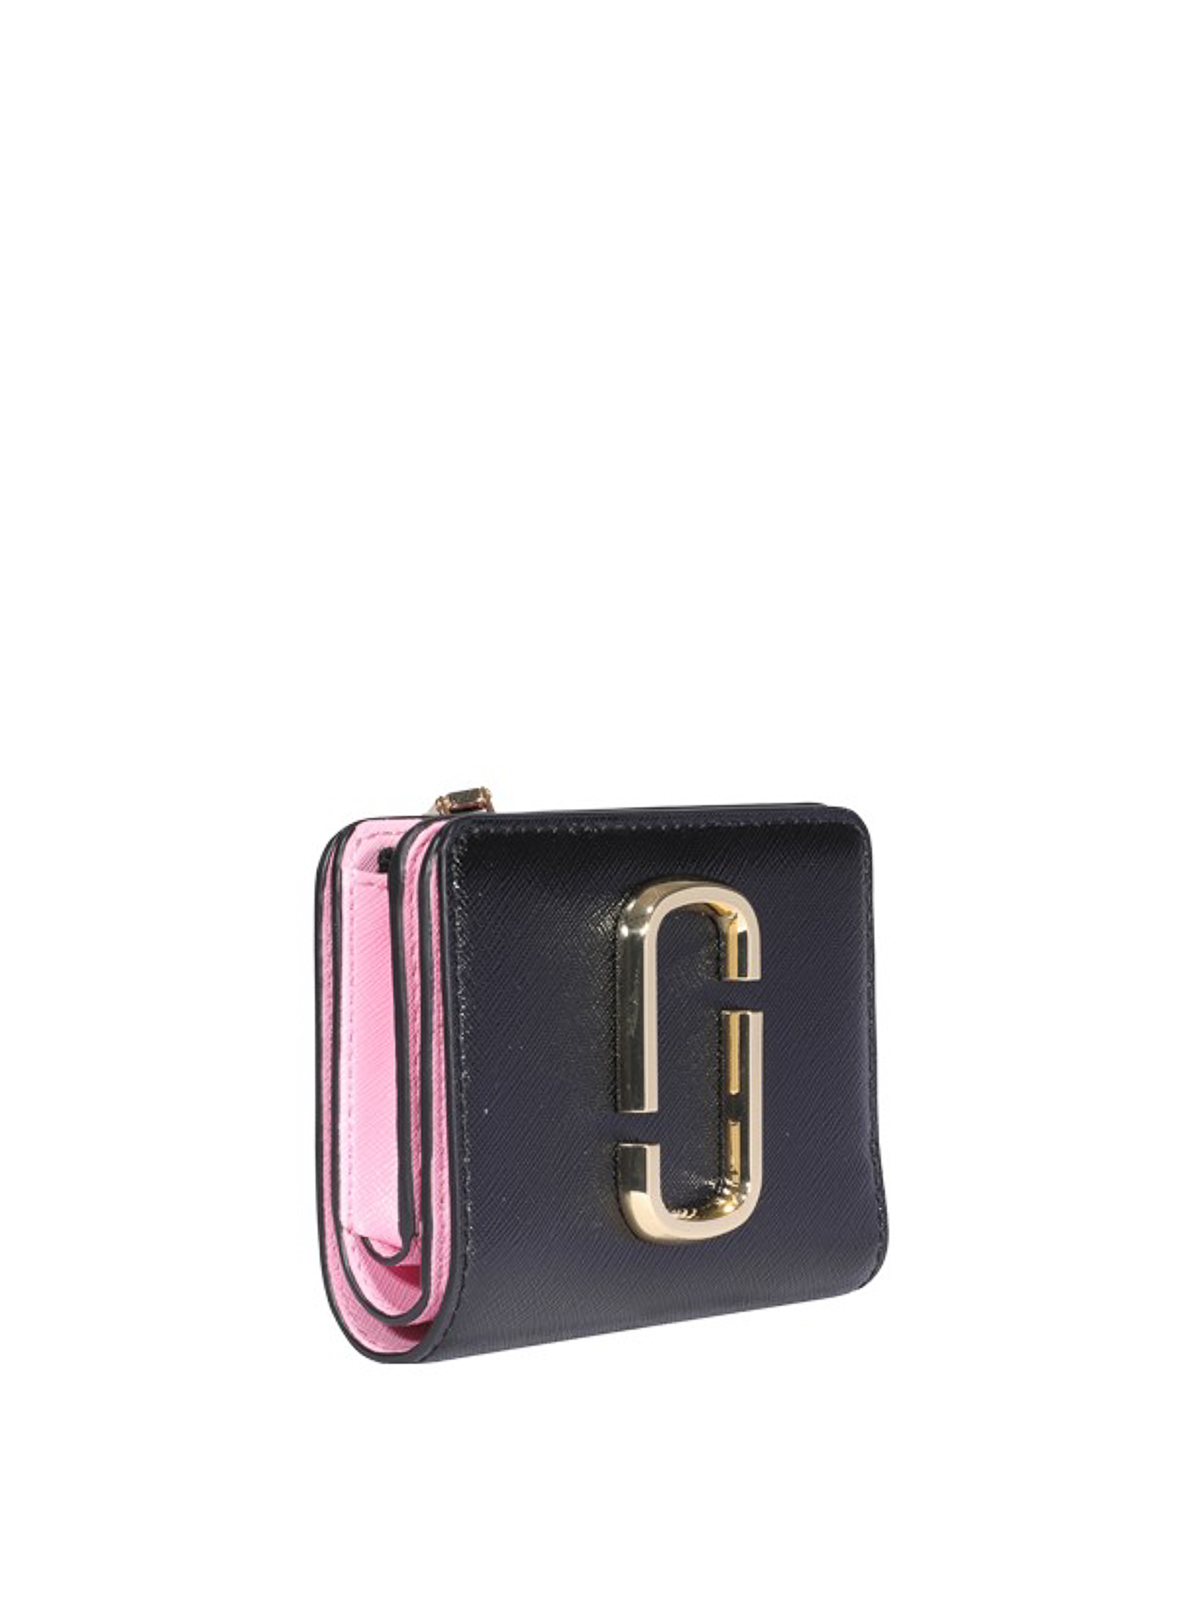 Marc Jacobs The Snapshot Mini Compact Wallet